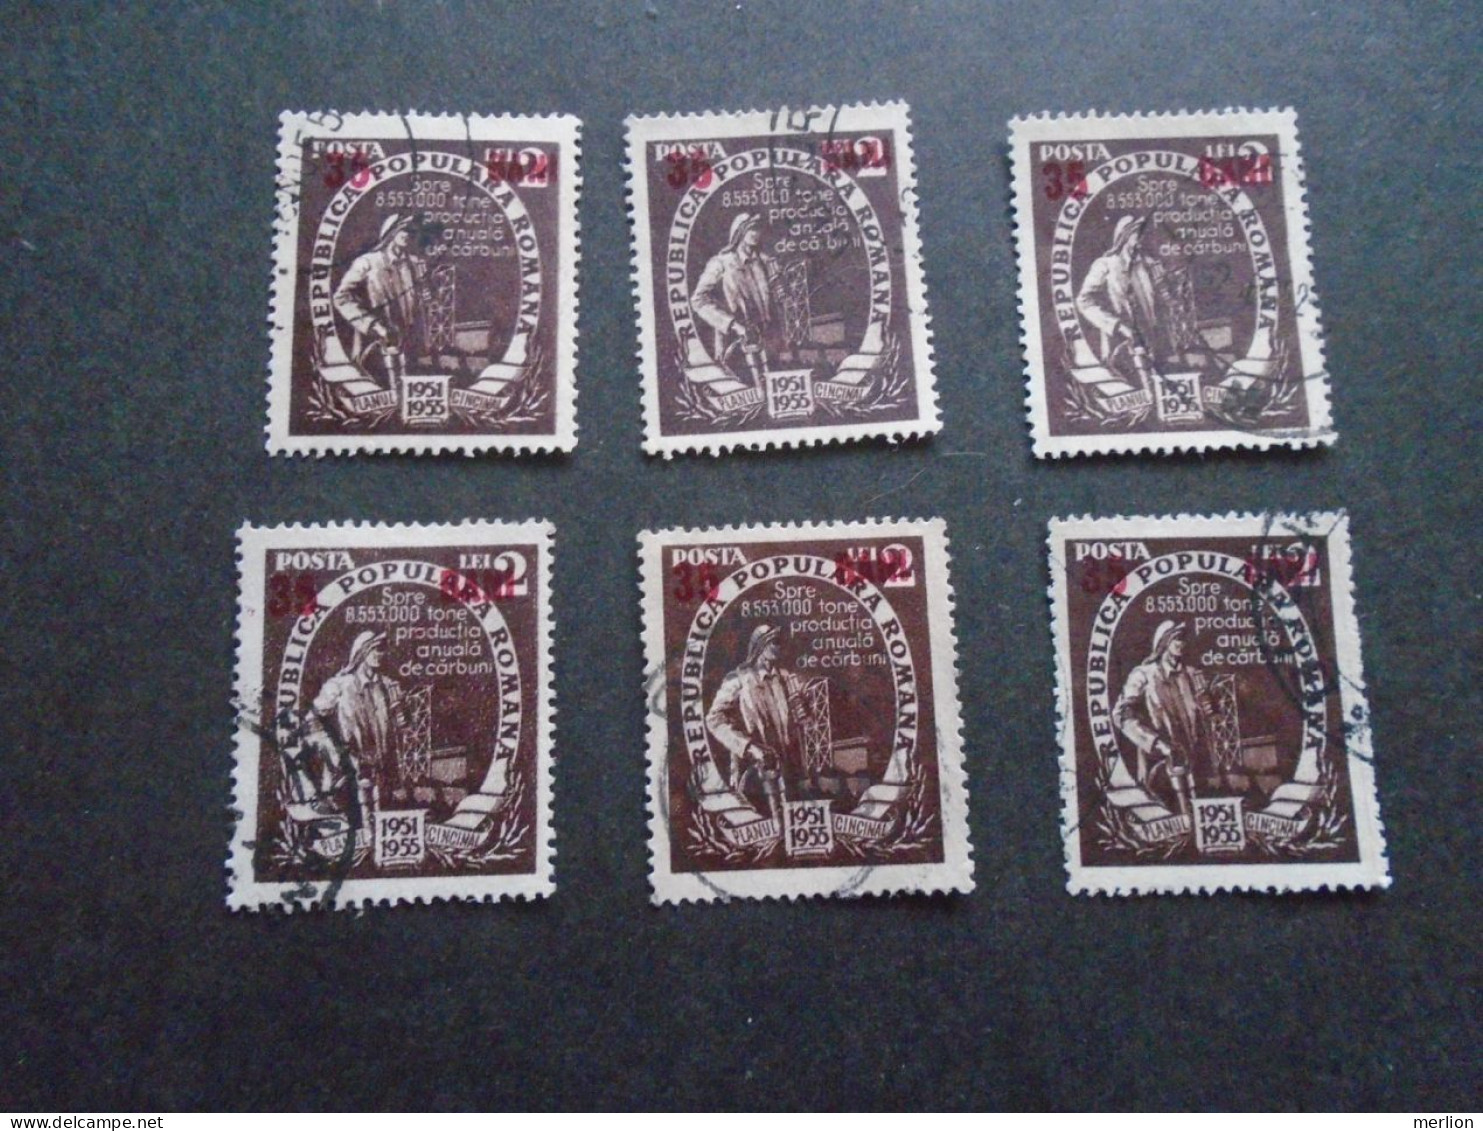 D202265   Romania  1955  - 6 Pcs Of Used Stamps  1354Y - Used Stamps